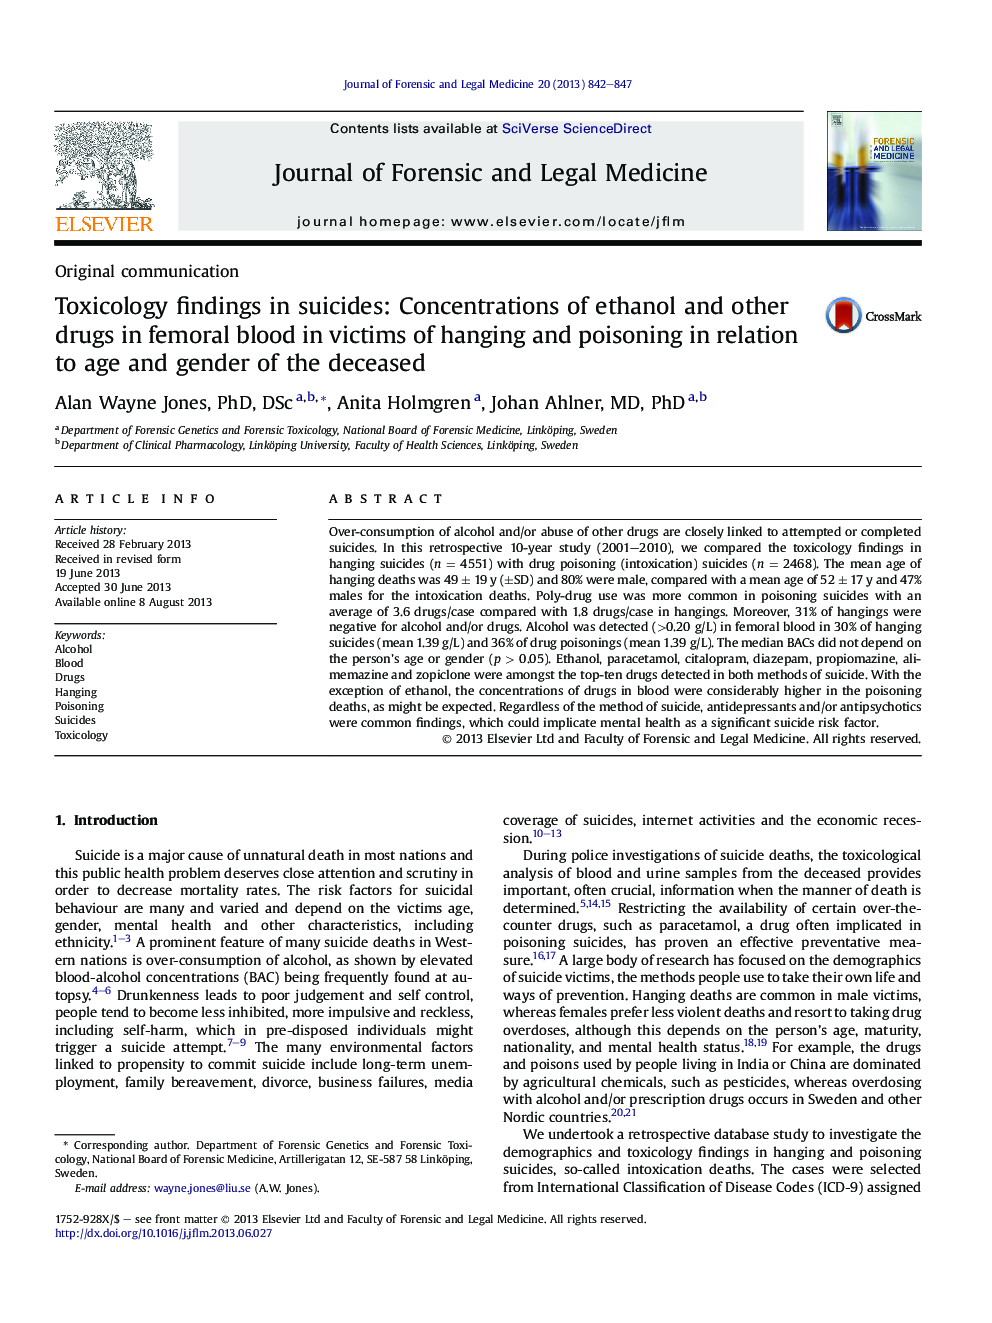 Toxicology findings in suicides: Concentrations of ethanol and other drugs in femoral blood in victims of hanging and poisoning in relation to age and gender of the deceased